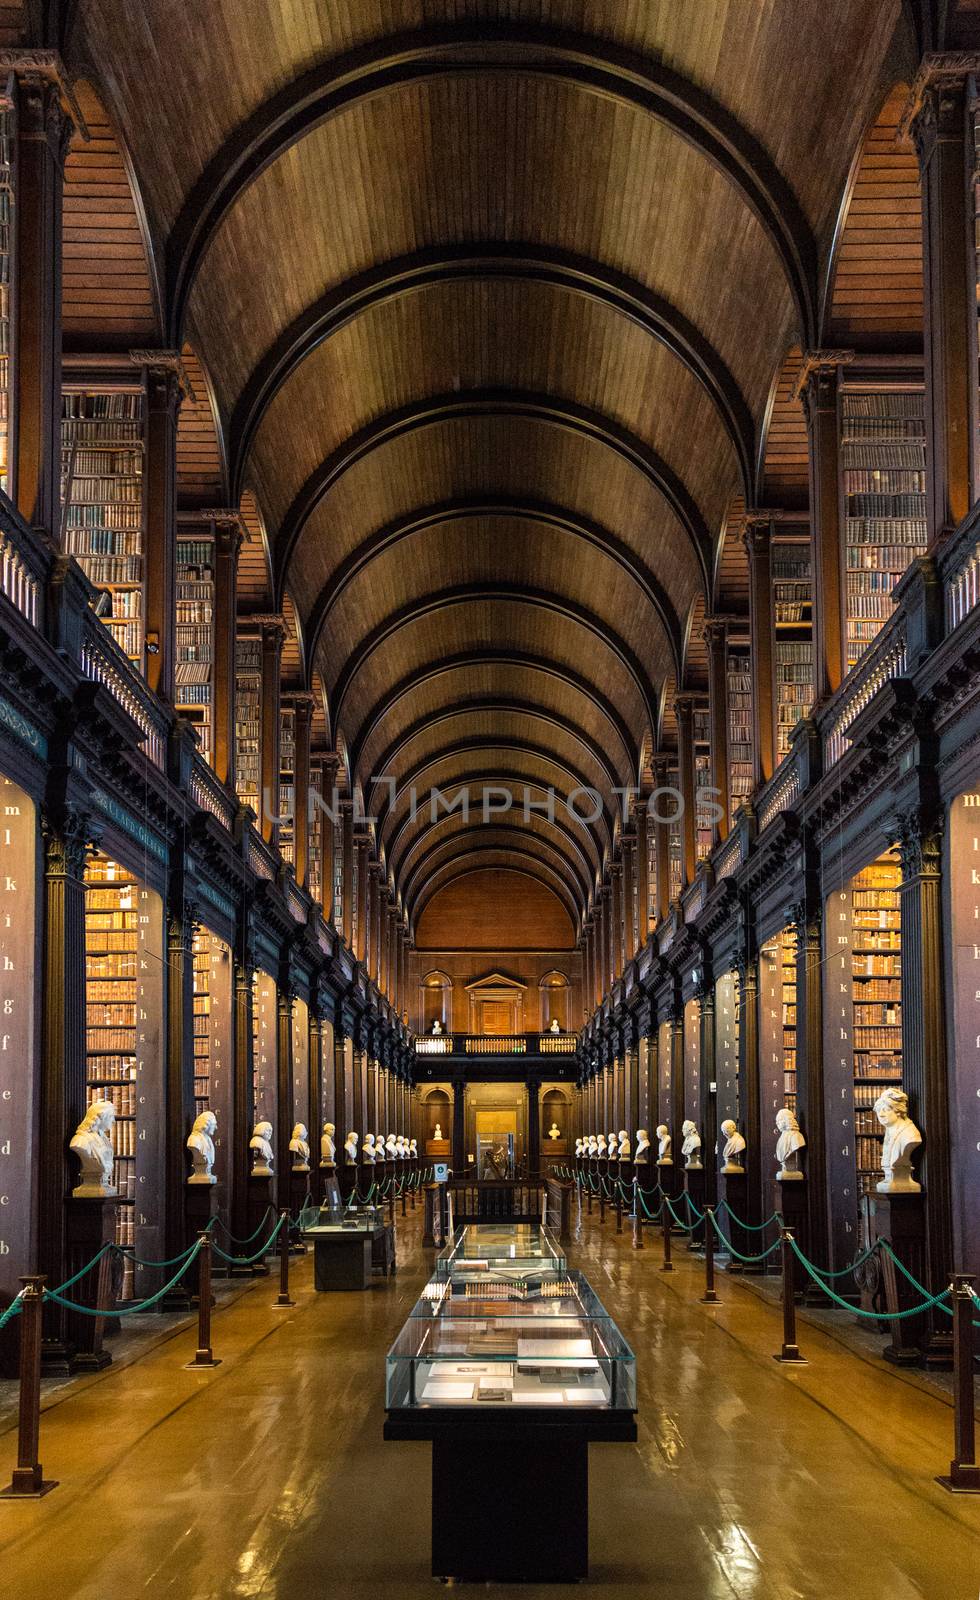 DUBLIN, IRELAND, JAN 21 2017, The Long Room in the Trinity College Library on in Dublin, Ireland. Trinity College Library is the largest library in Ireland and home to The Book of Kells. by mlechanteur